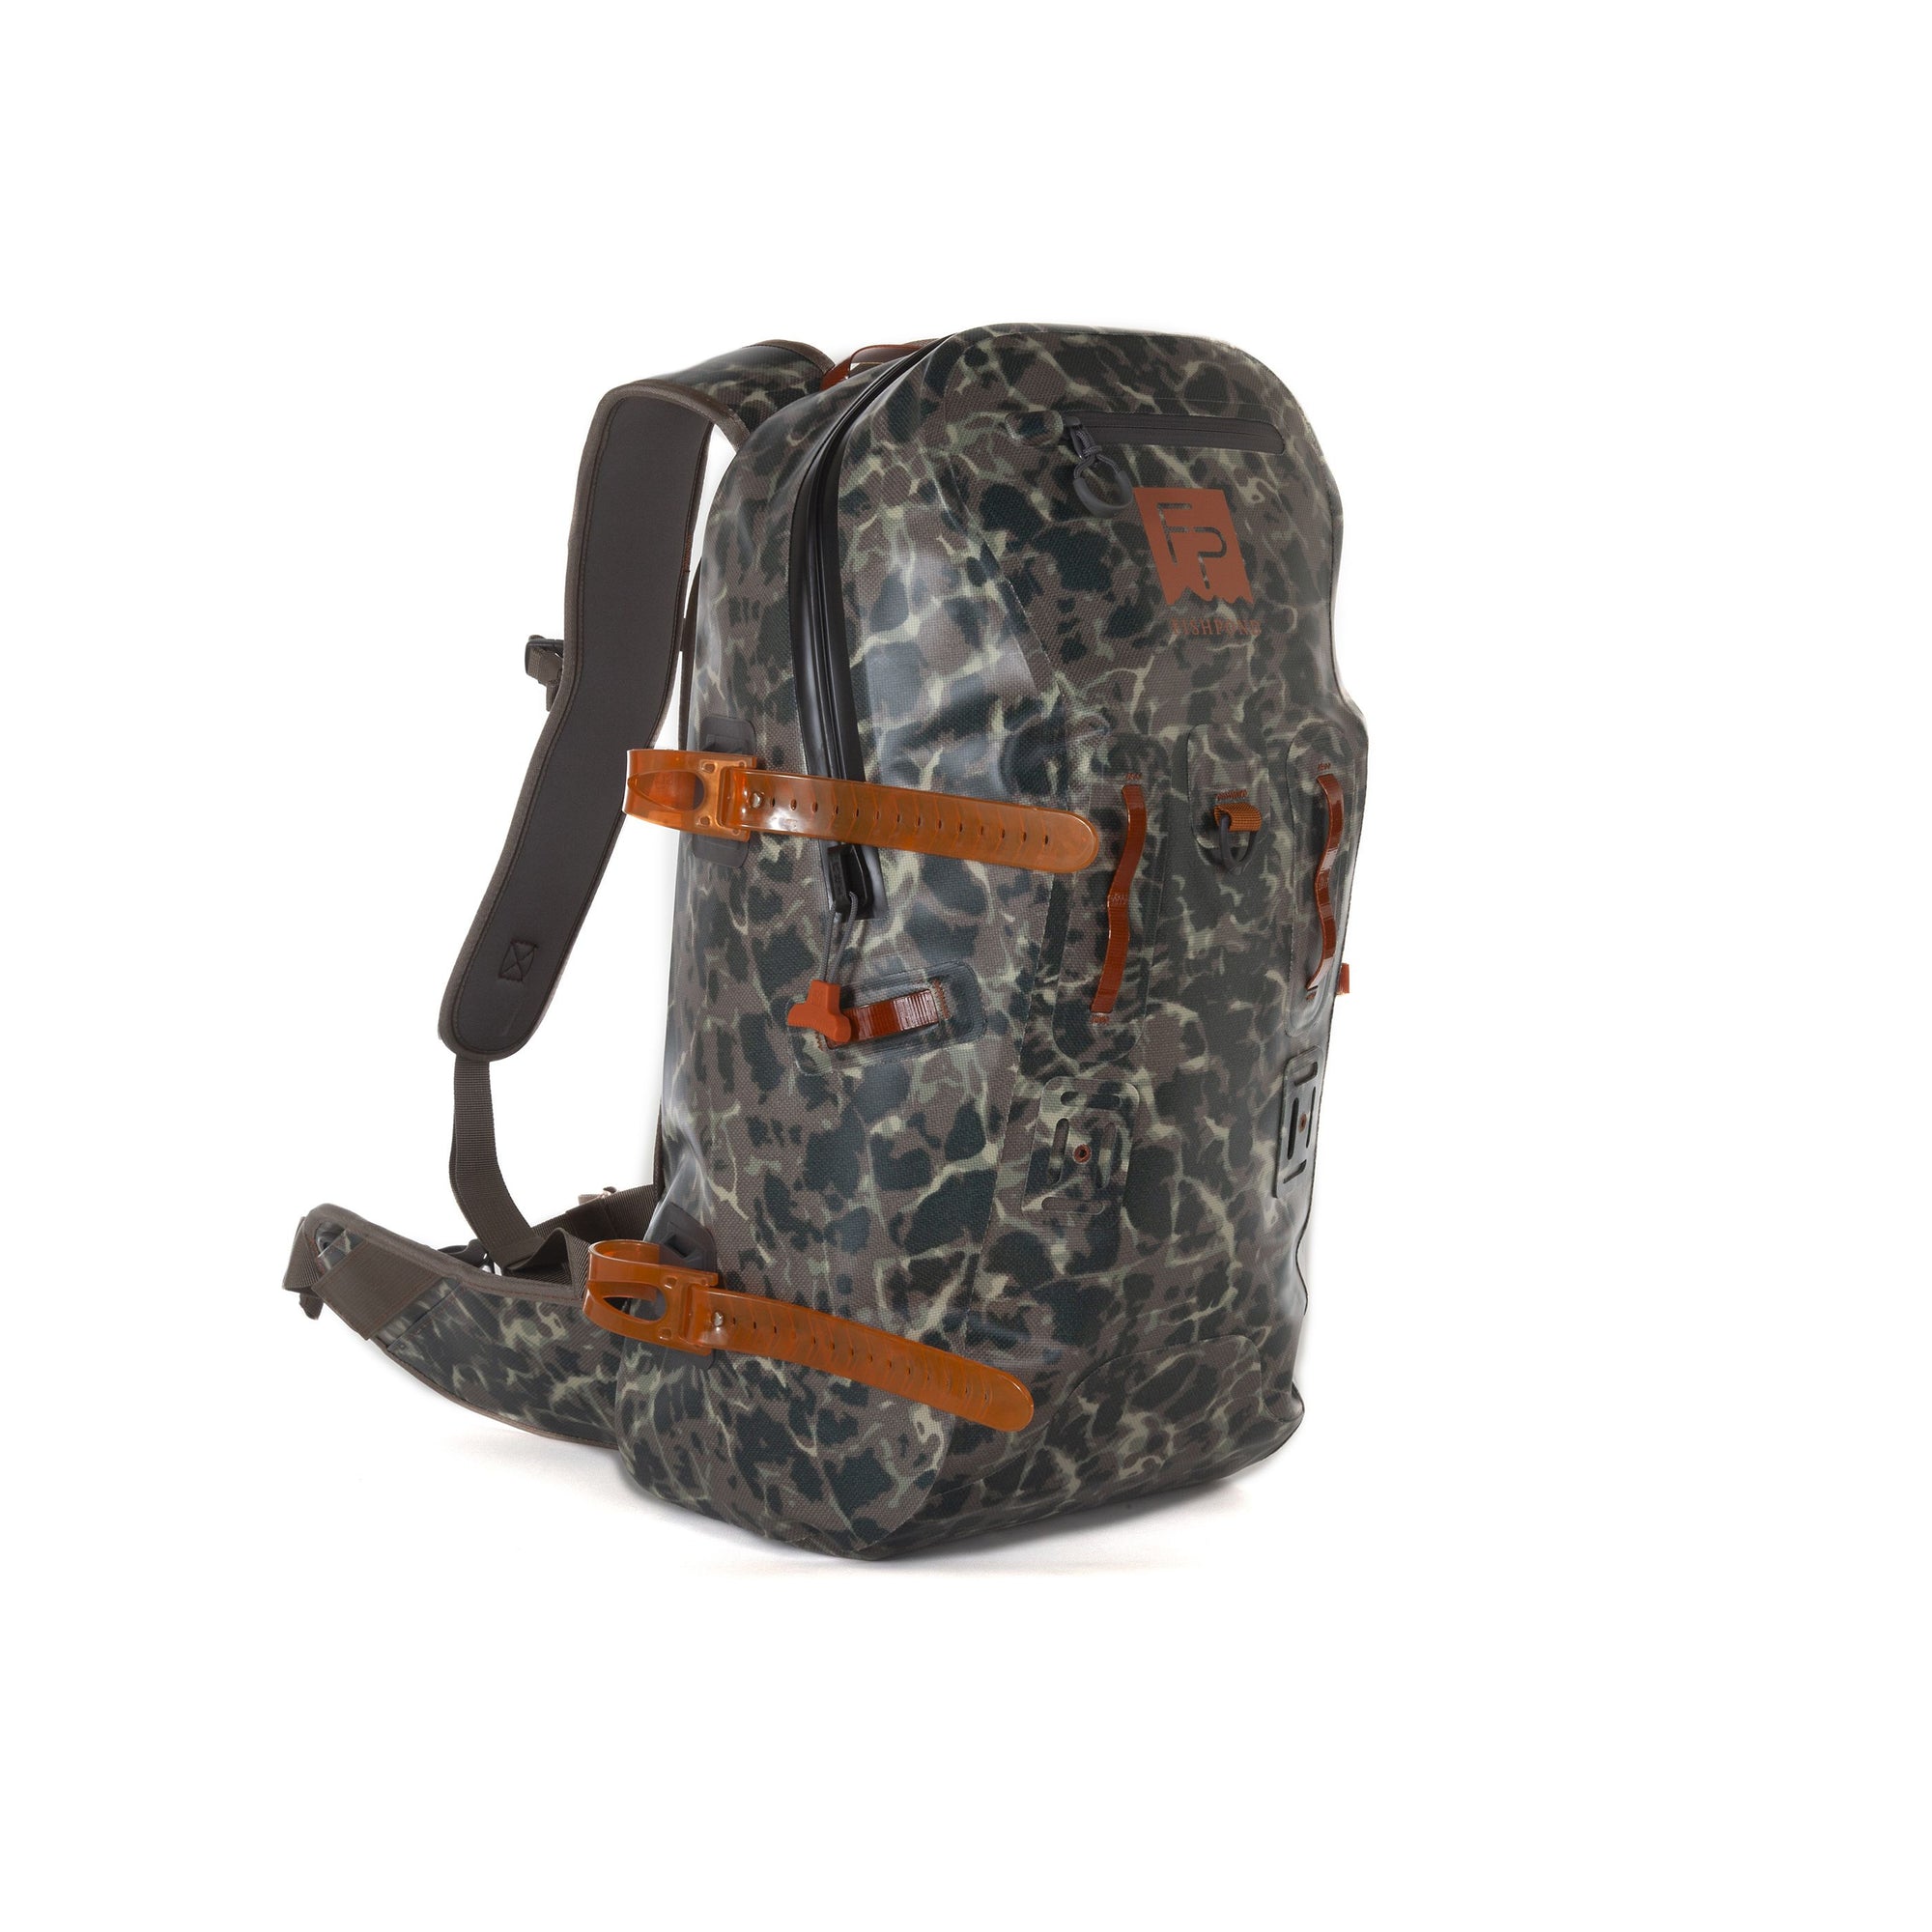 Fishpond Firehole Backpack – Guide Flyfishing, Fly Fishing Rods, Reels, Sage, Redington, RIO